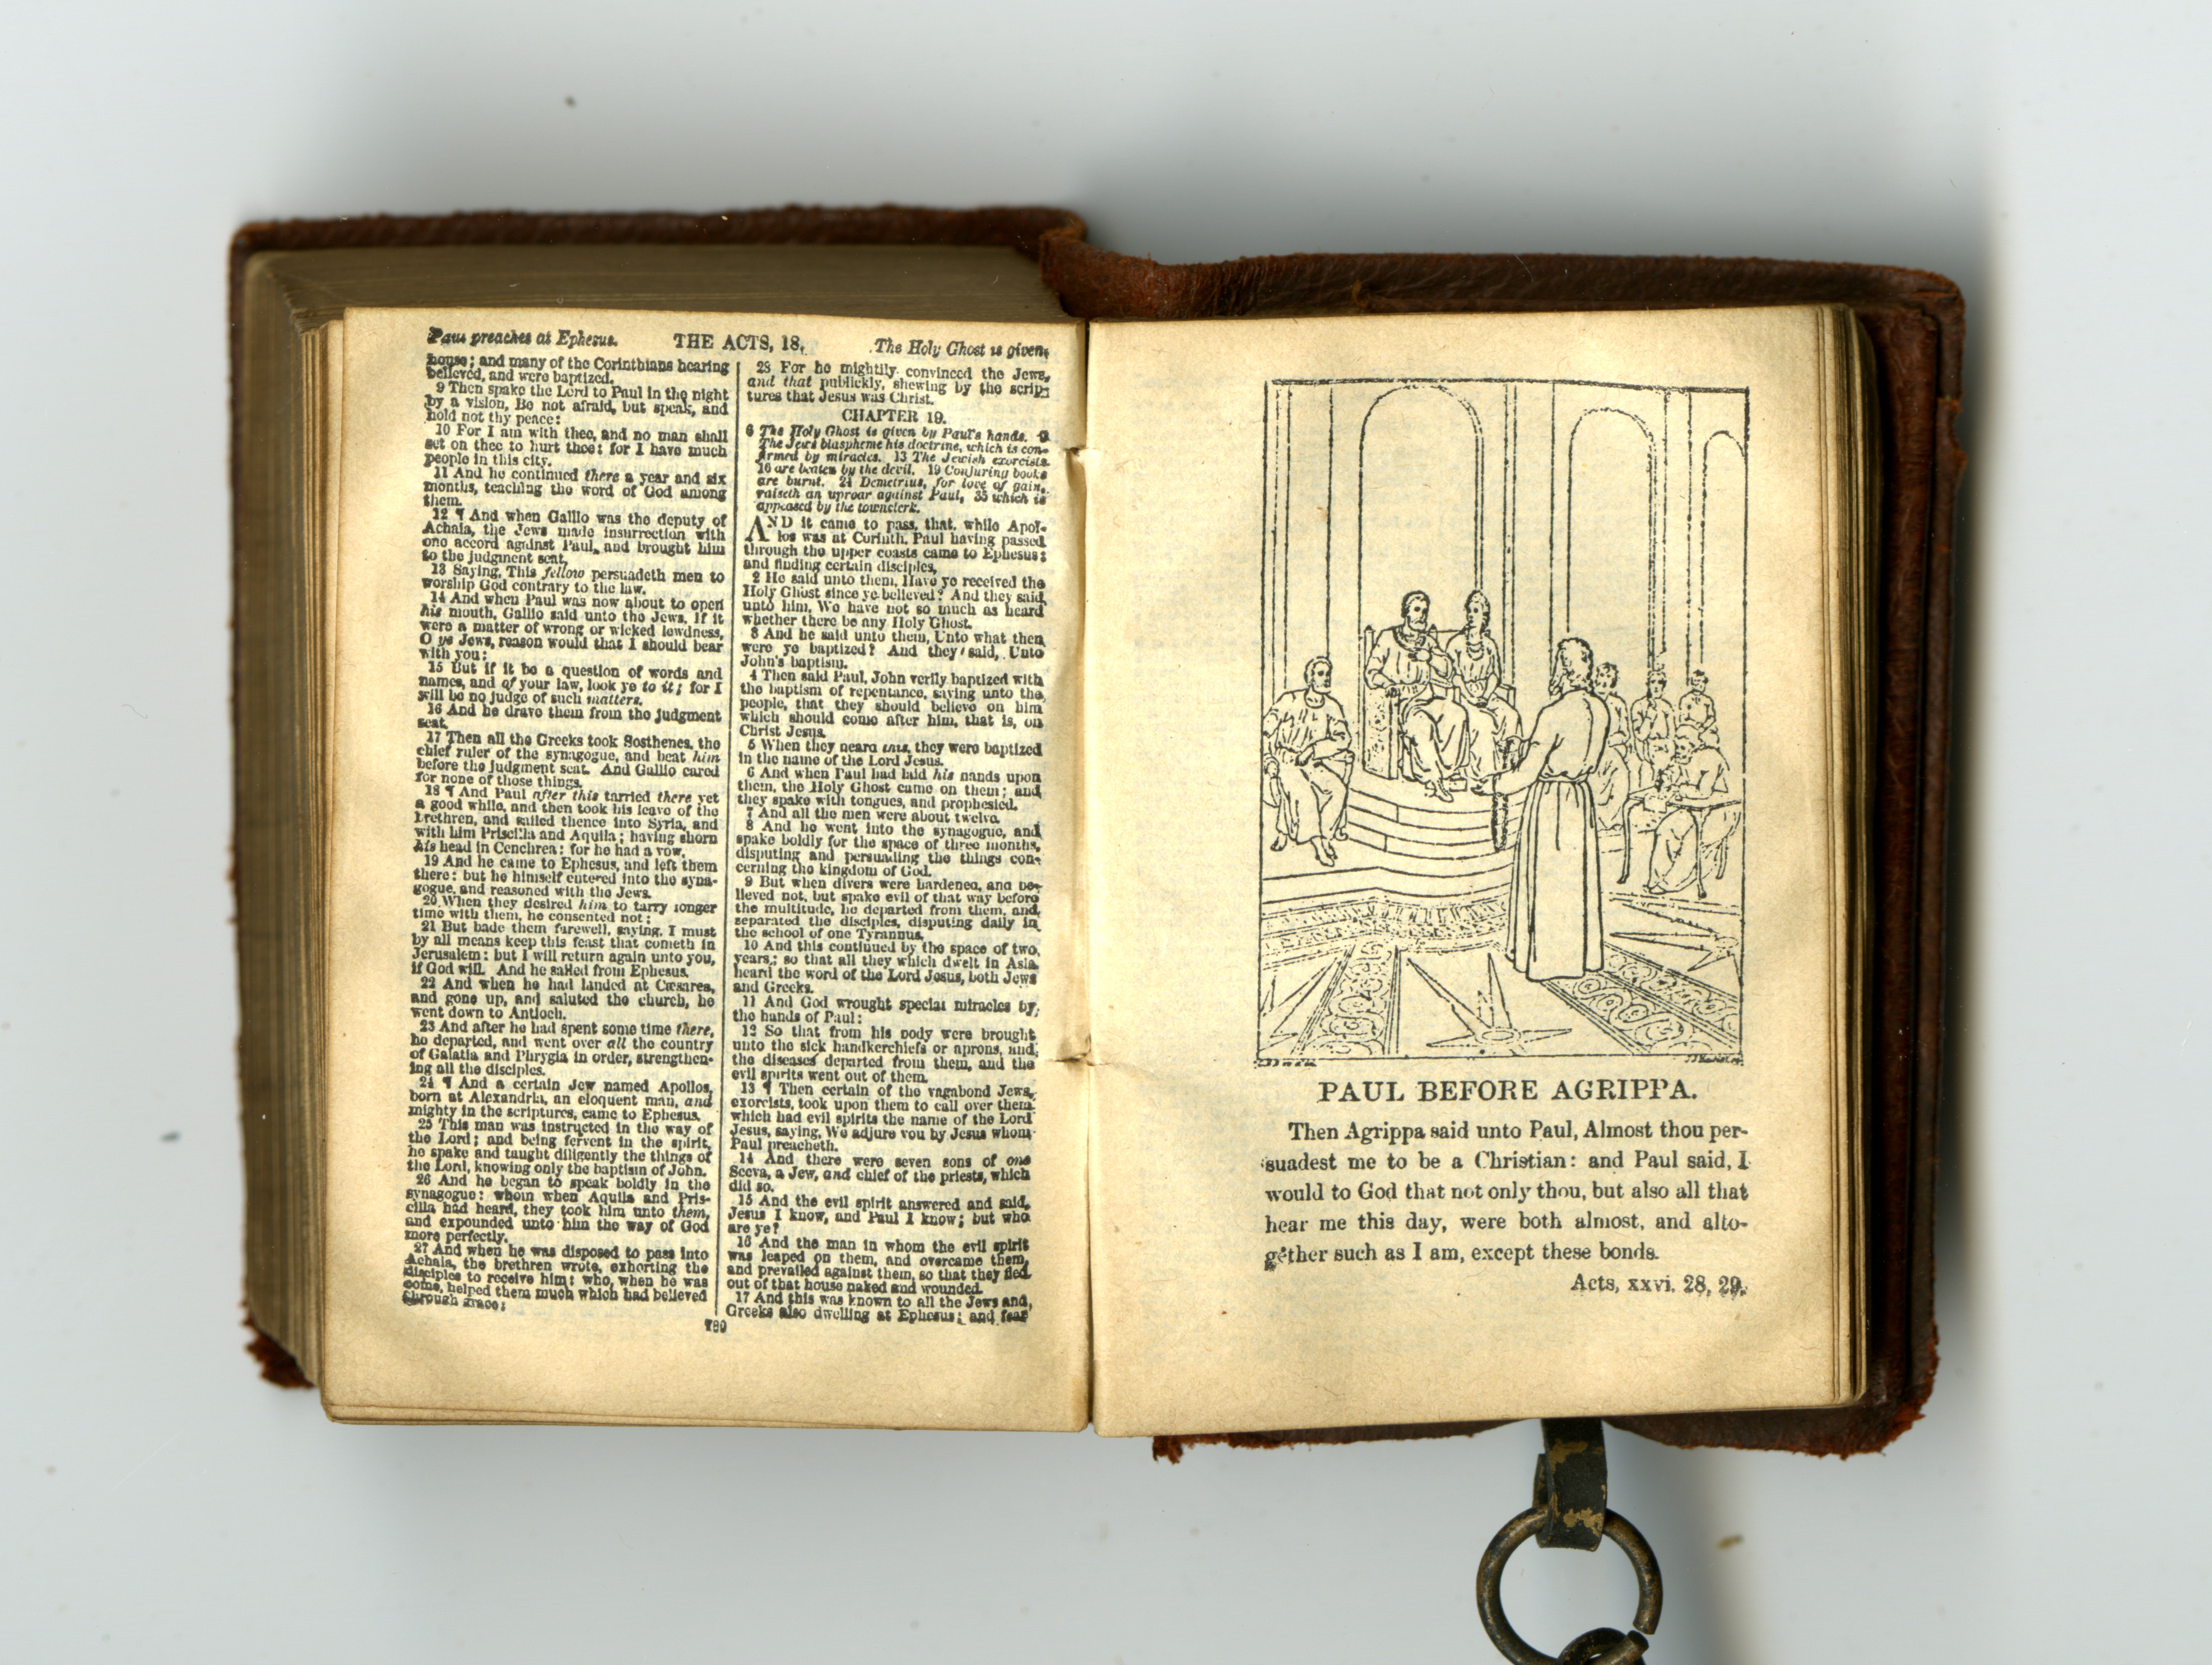 Page from Acts, featuring illustration of Paul, from miniature Bible, published in Glasgow by David Bryce in 1901, attached to miniature lectern by a chain